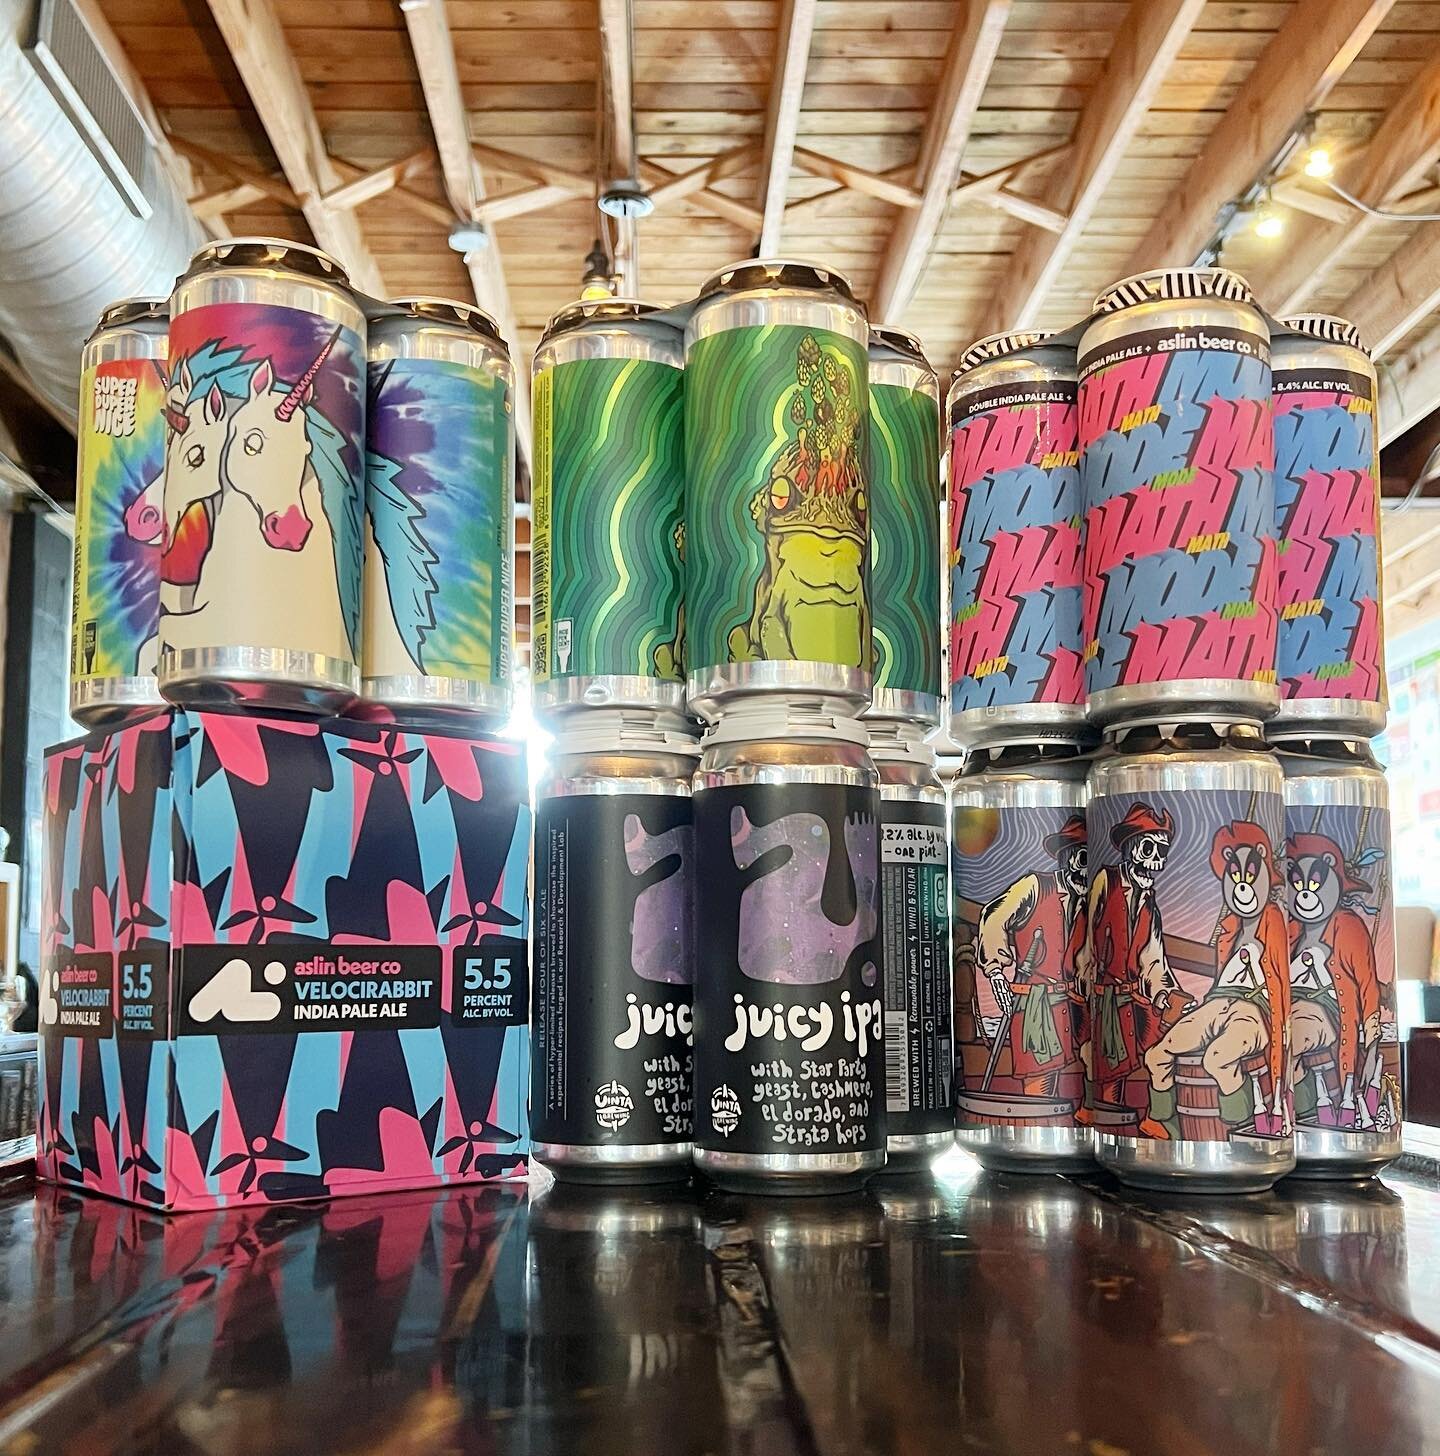 Friday&rsquo;s freshest beers are here for ya just in time for the weekend! 🍻
@aslinbeerco @midwoodclt @trippinganimalsbrewing